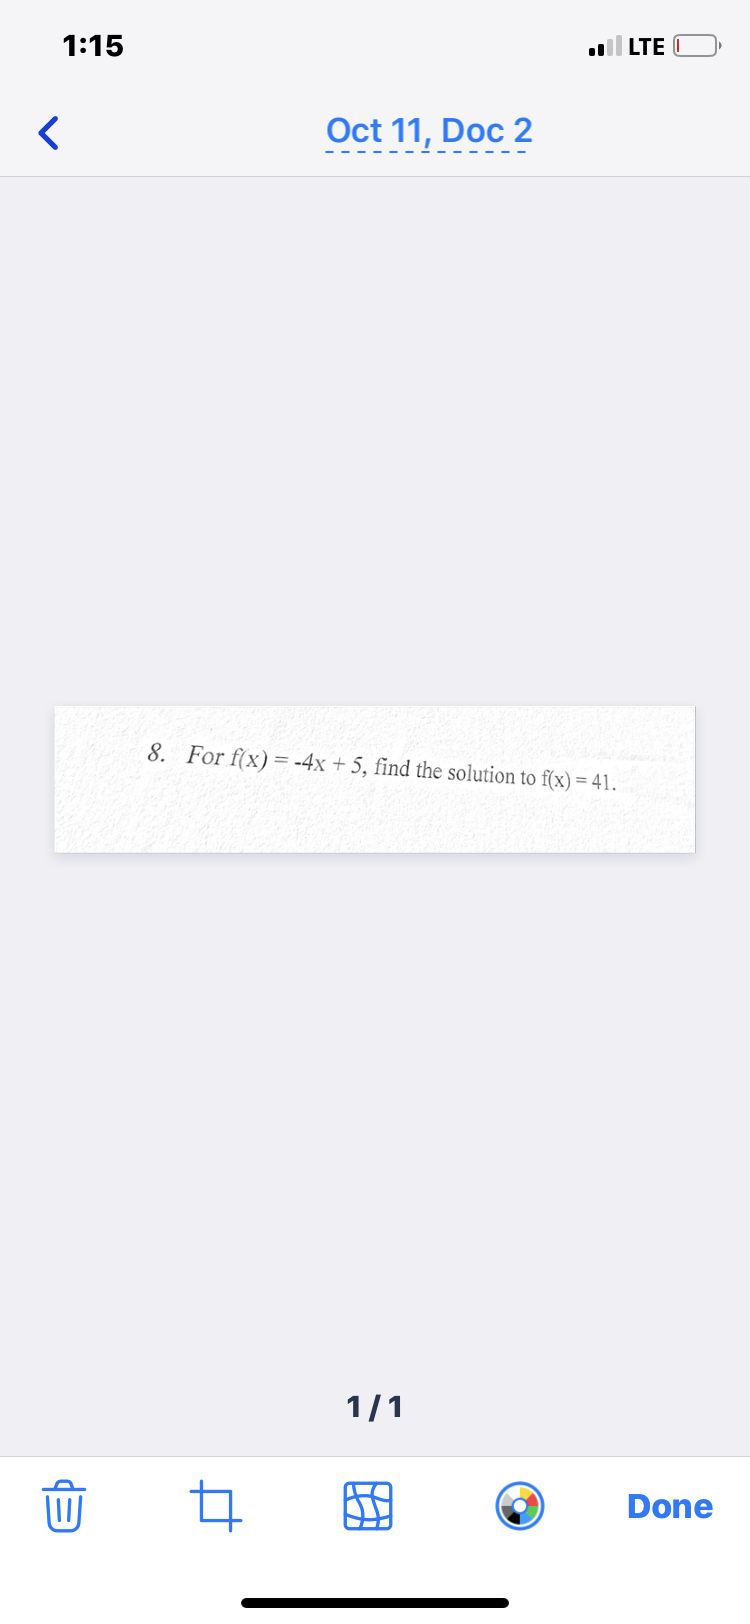 1:15
l LTE
Oct 11, Doc 2
8. For f(x) = -4x + 5, find the solution to f(x)= 41.
1/1
Done
